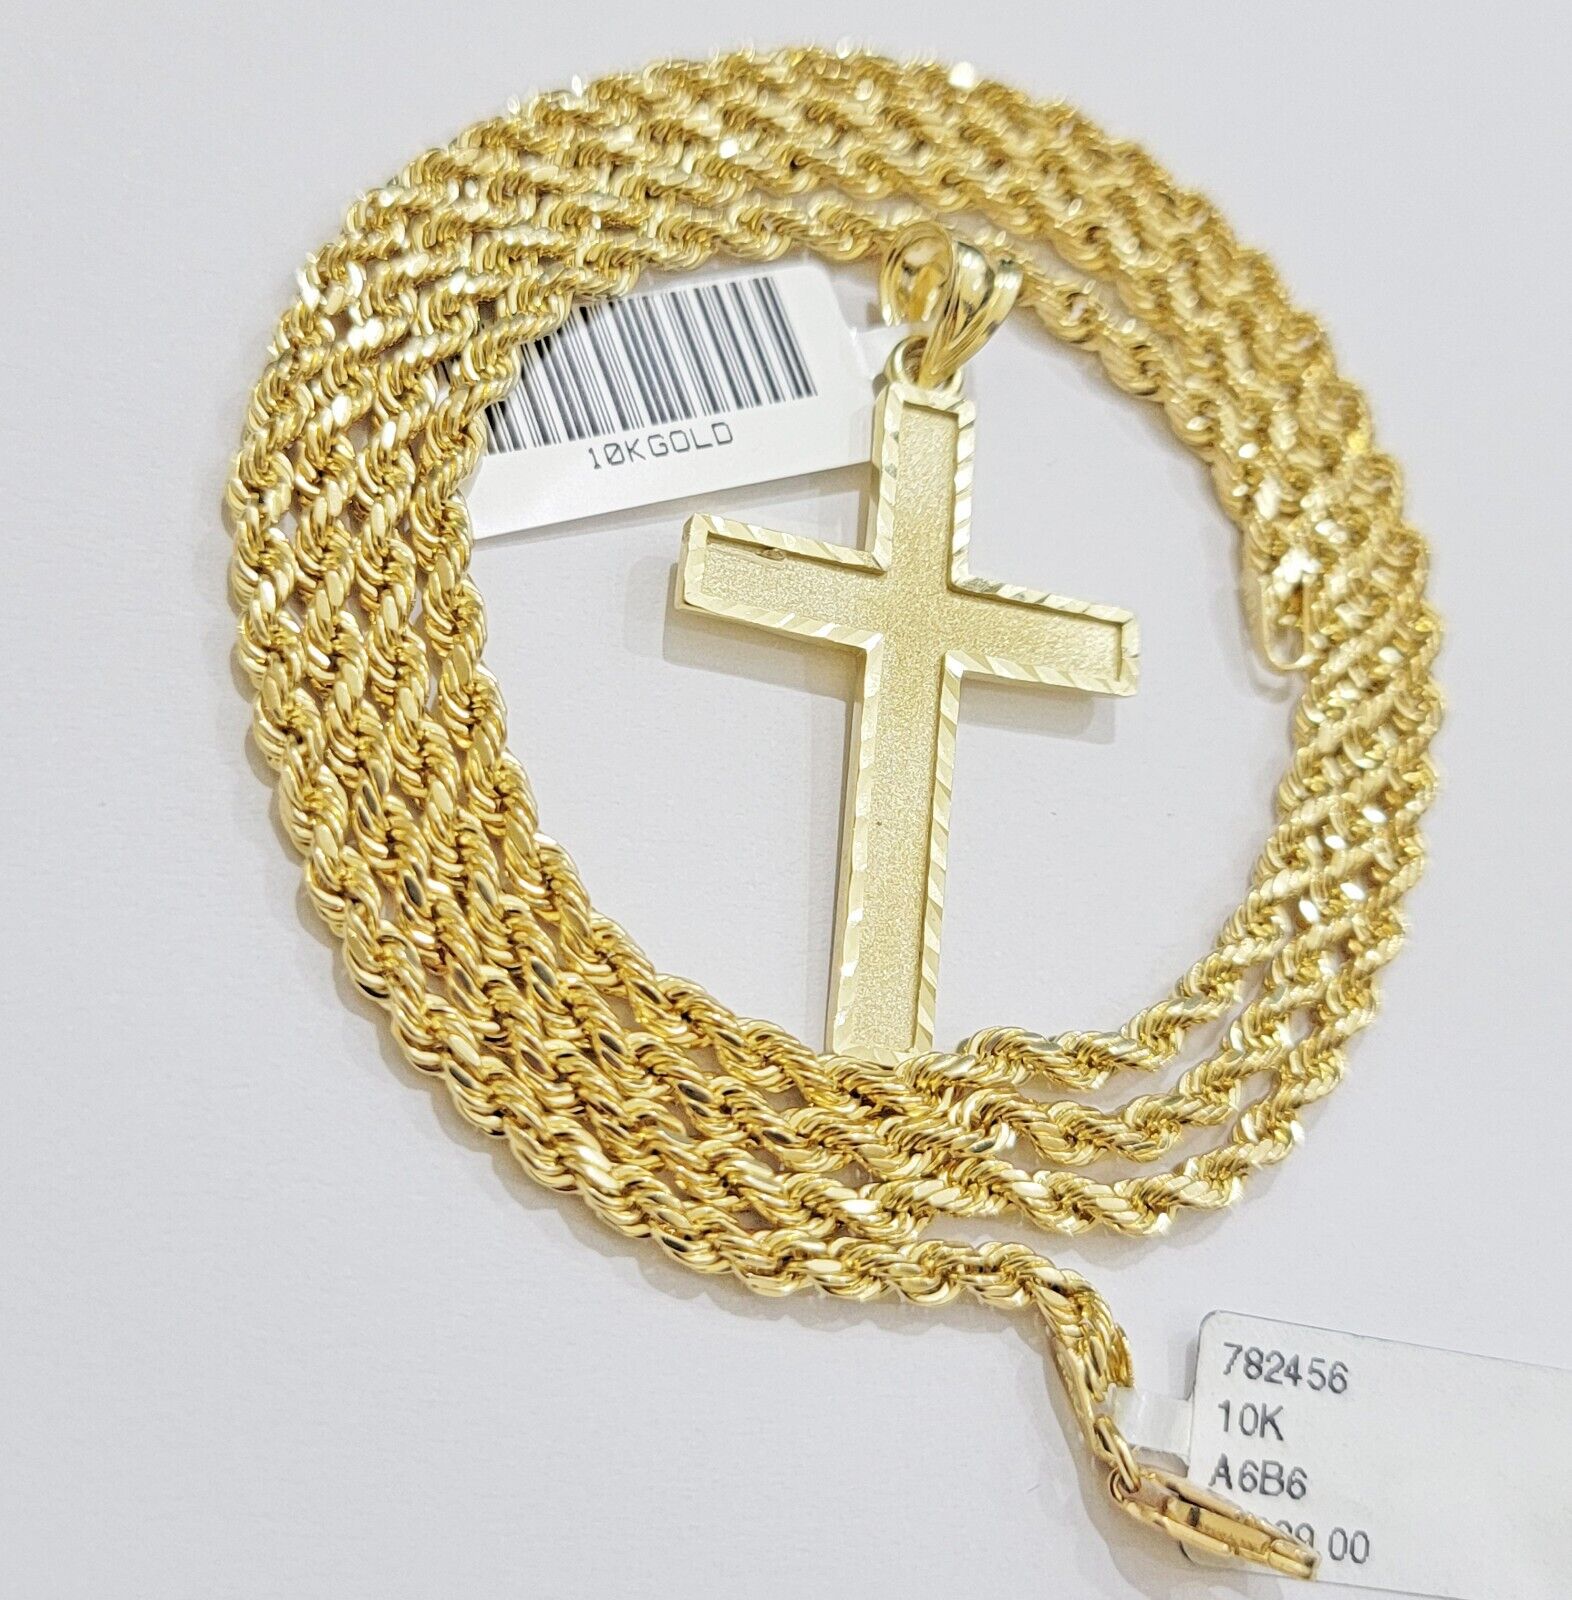 10k Yellow Gold Rope Chain & Cross Charm Set REAL 10KT 20 Inch necklace pendant